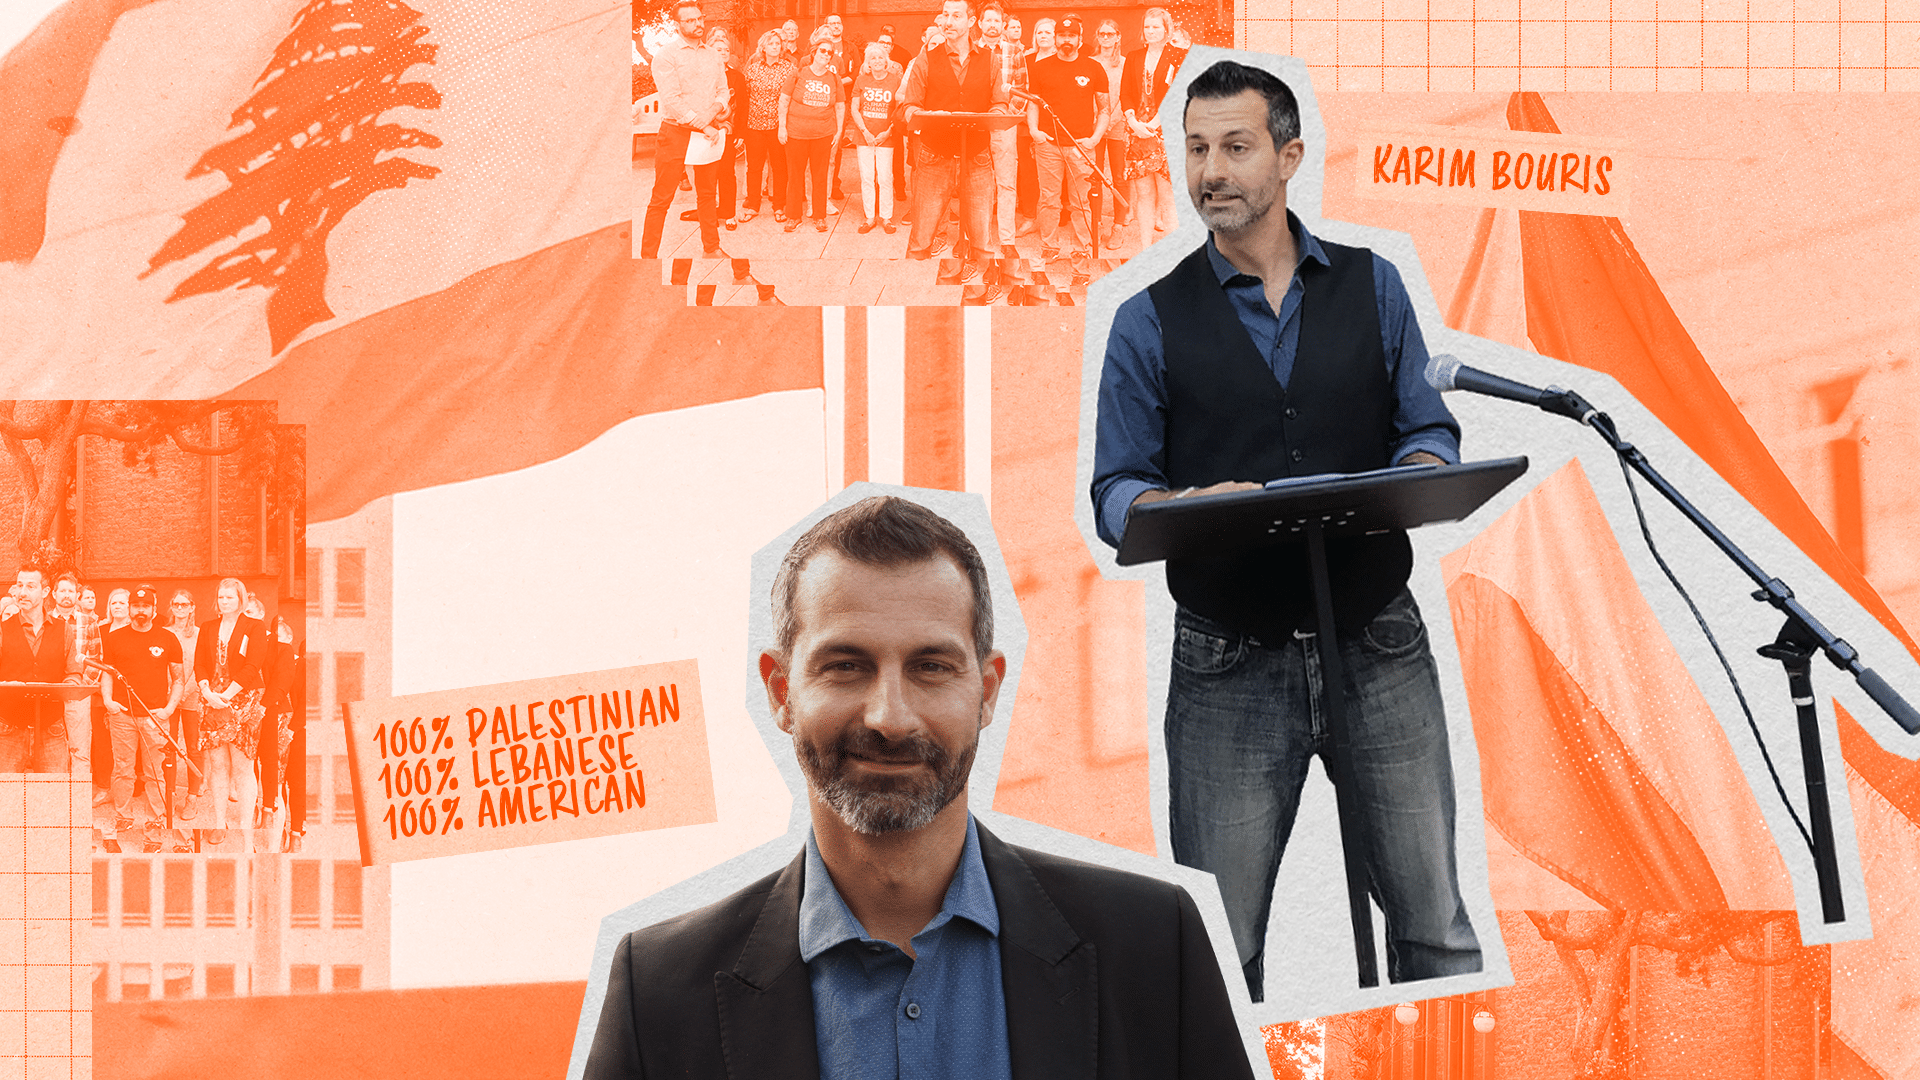 Collage of Karim Bouris speaking at podium with photos of Palestine and Lebanon flags and text that reads "100% Palestinian, 100% Lebanese, 100% American"